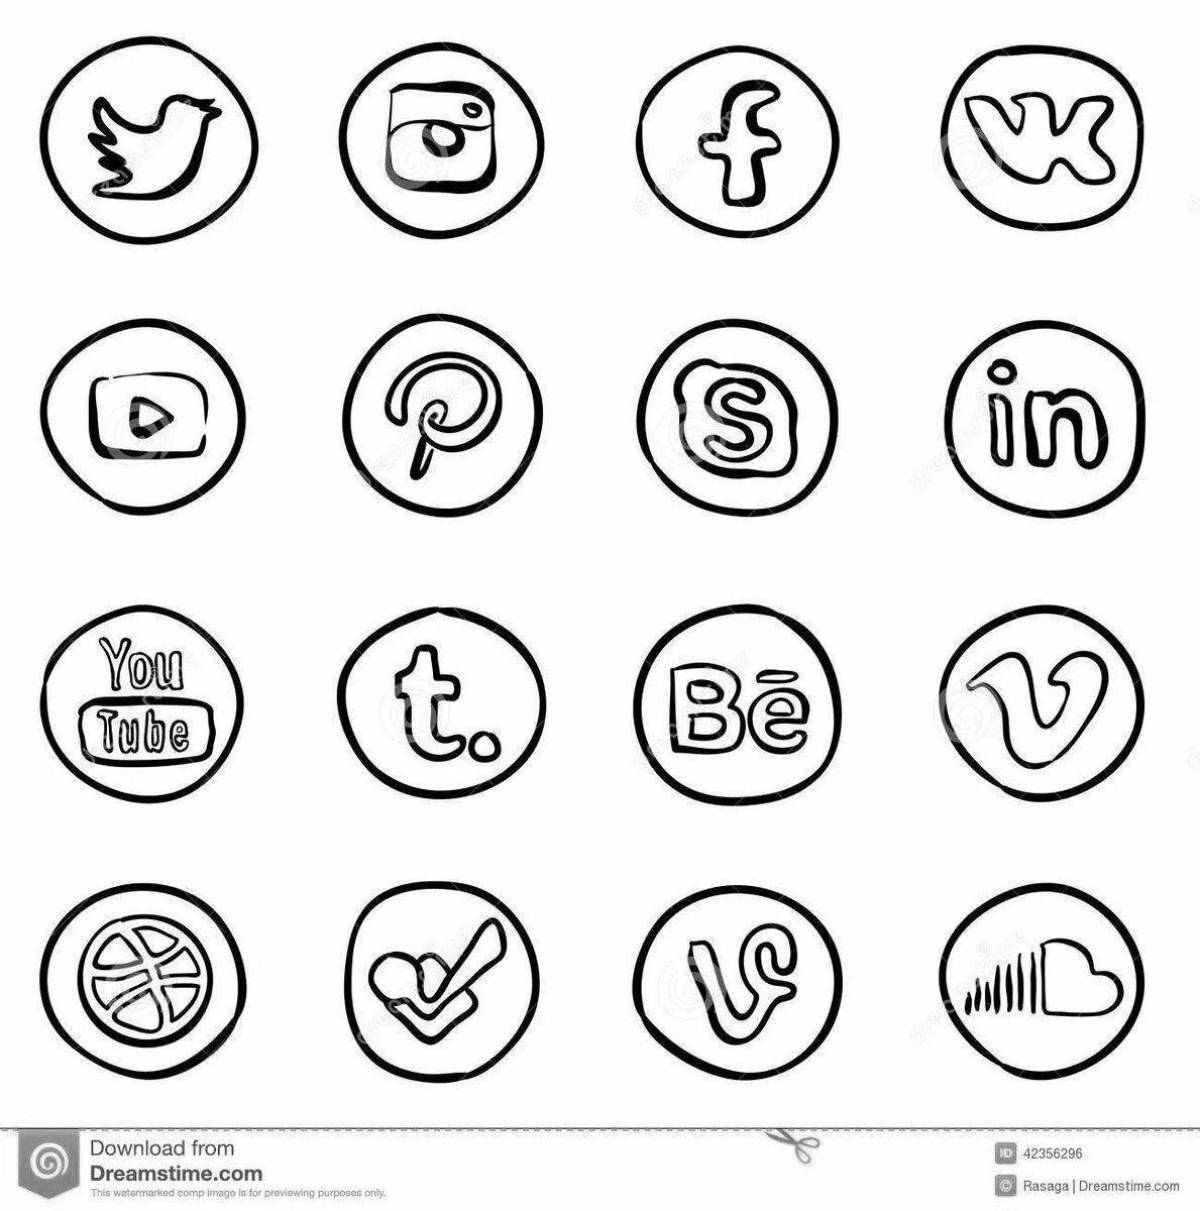 Adorable coloring pages with social media logos